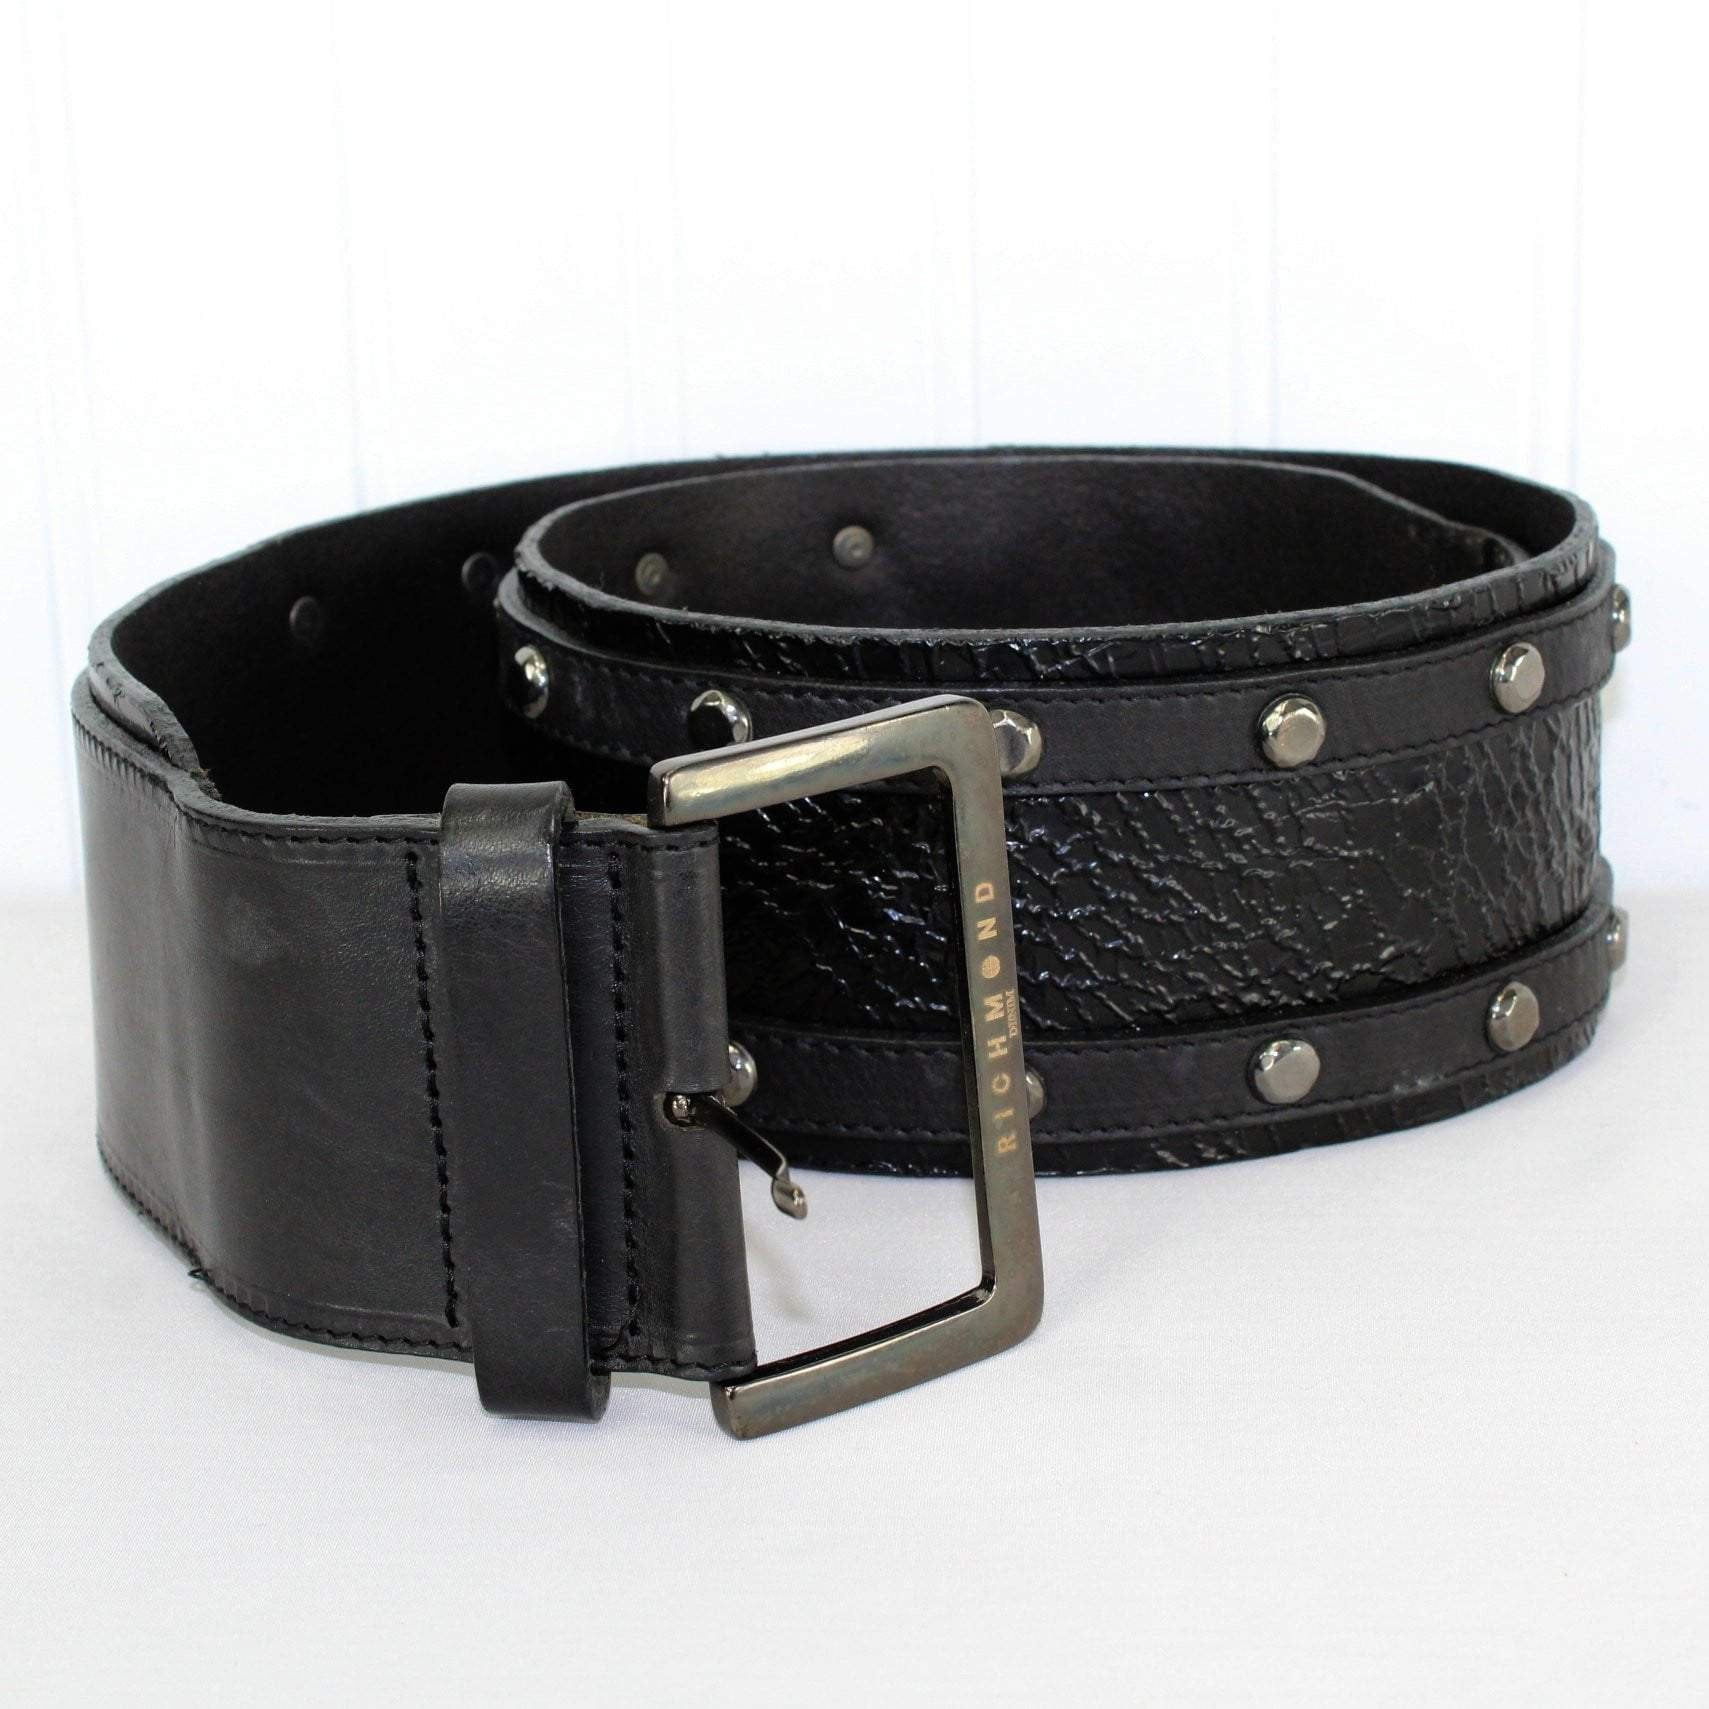 Richmond Denim Belt - Black Layered Bands Leather With Gunmetal Studs no signs of use